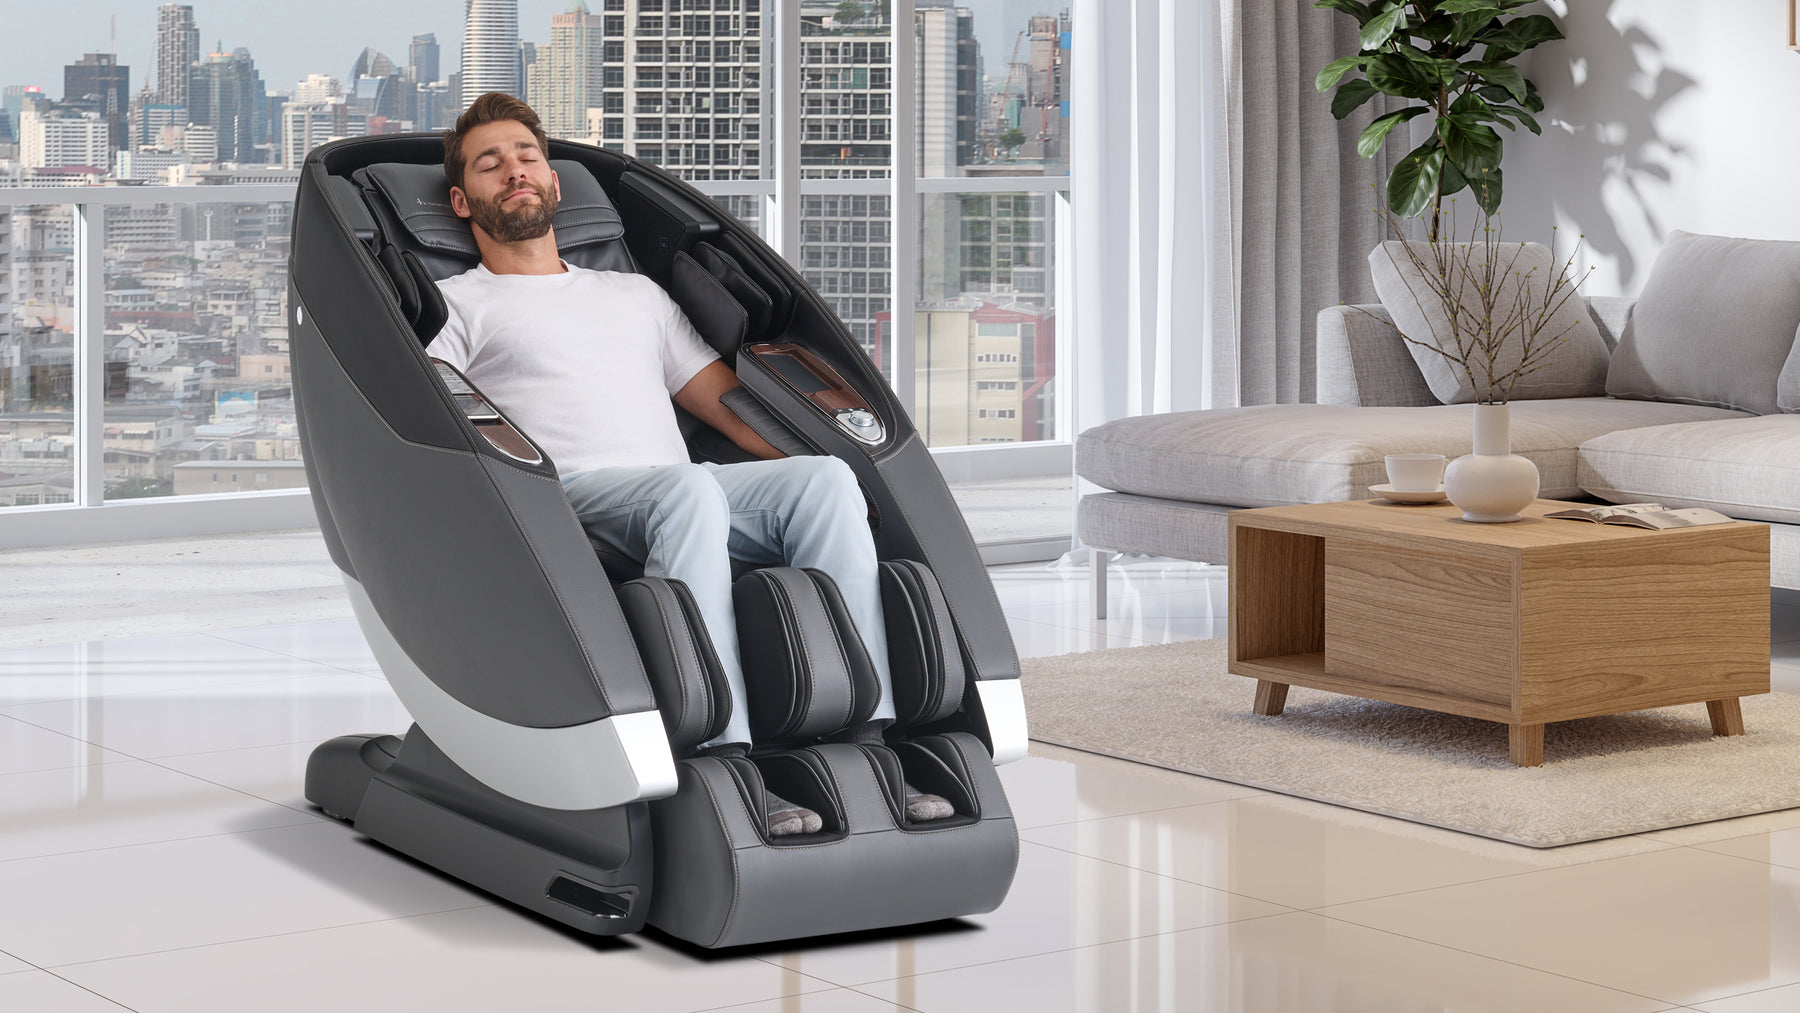 Man sitting in the Super Novo 2.0 Massage Chair by Human Touch in a living room setting